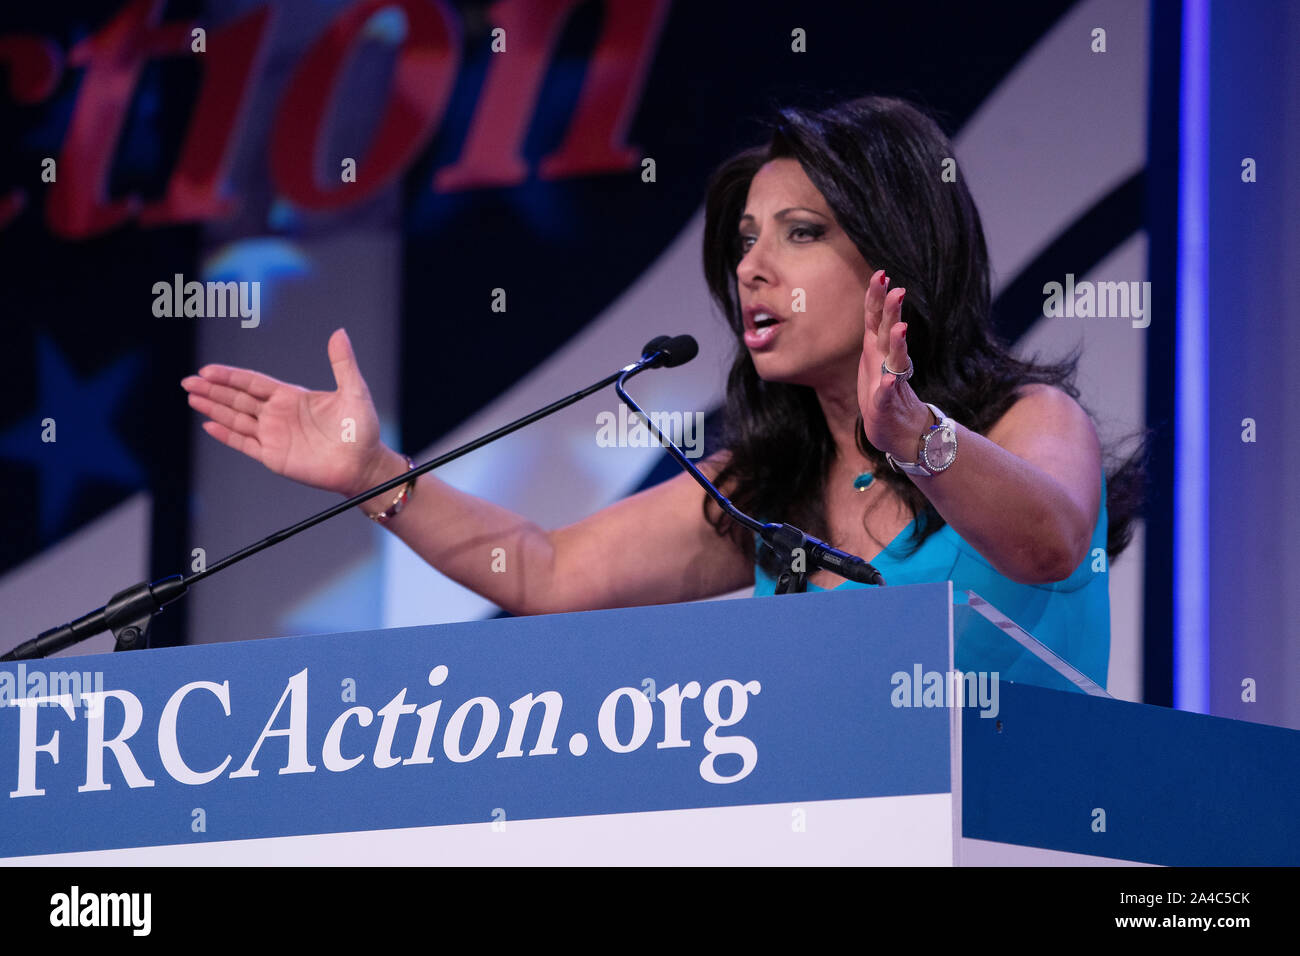 Washington, United States Of America. 12th Oct, 2019. Brigitte Gabriel, founder and president of the anti-Islam group Act for America, speaks at the Values Voter Summit, a conference of Christian religious and social conservatives at the Omni Shoreham Hotel in Washington, DC on Saturday, October 12, 2019. The Values Voter Summit is produced and hosted by FRC Action, the political arm of the Family Research Council. (Photo by Jeff Malet) Photo via Credit: Newscom/Alamy Live News Stock Photo